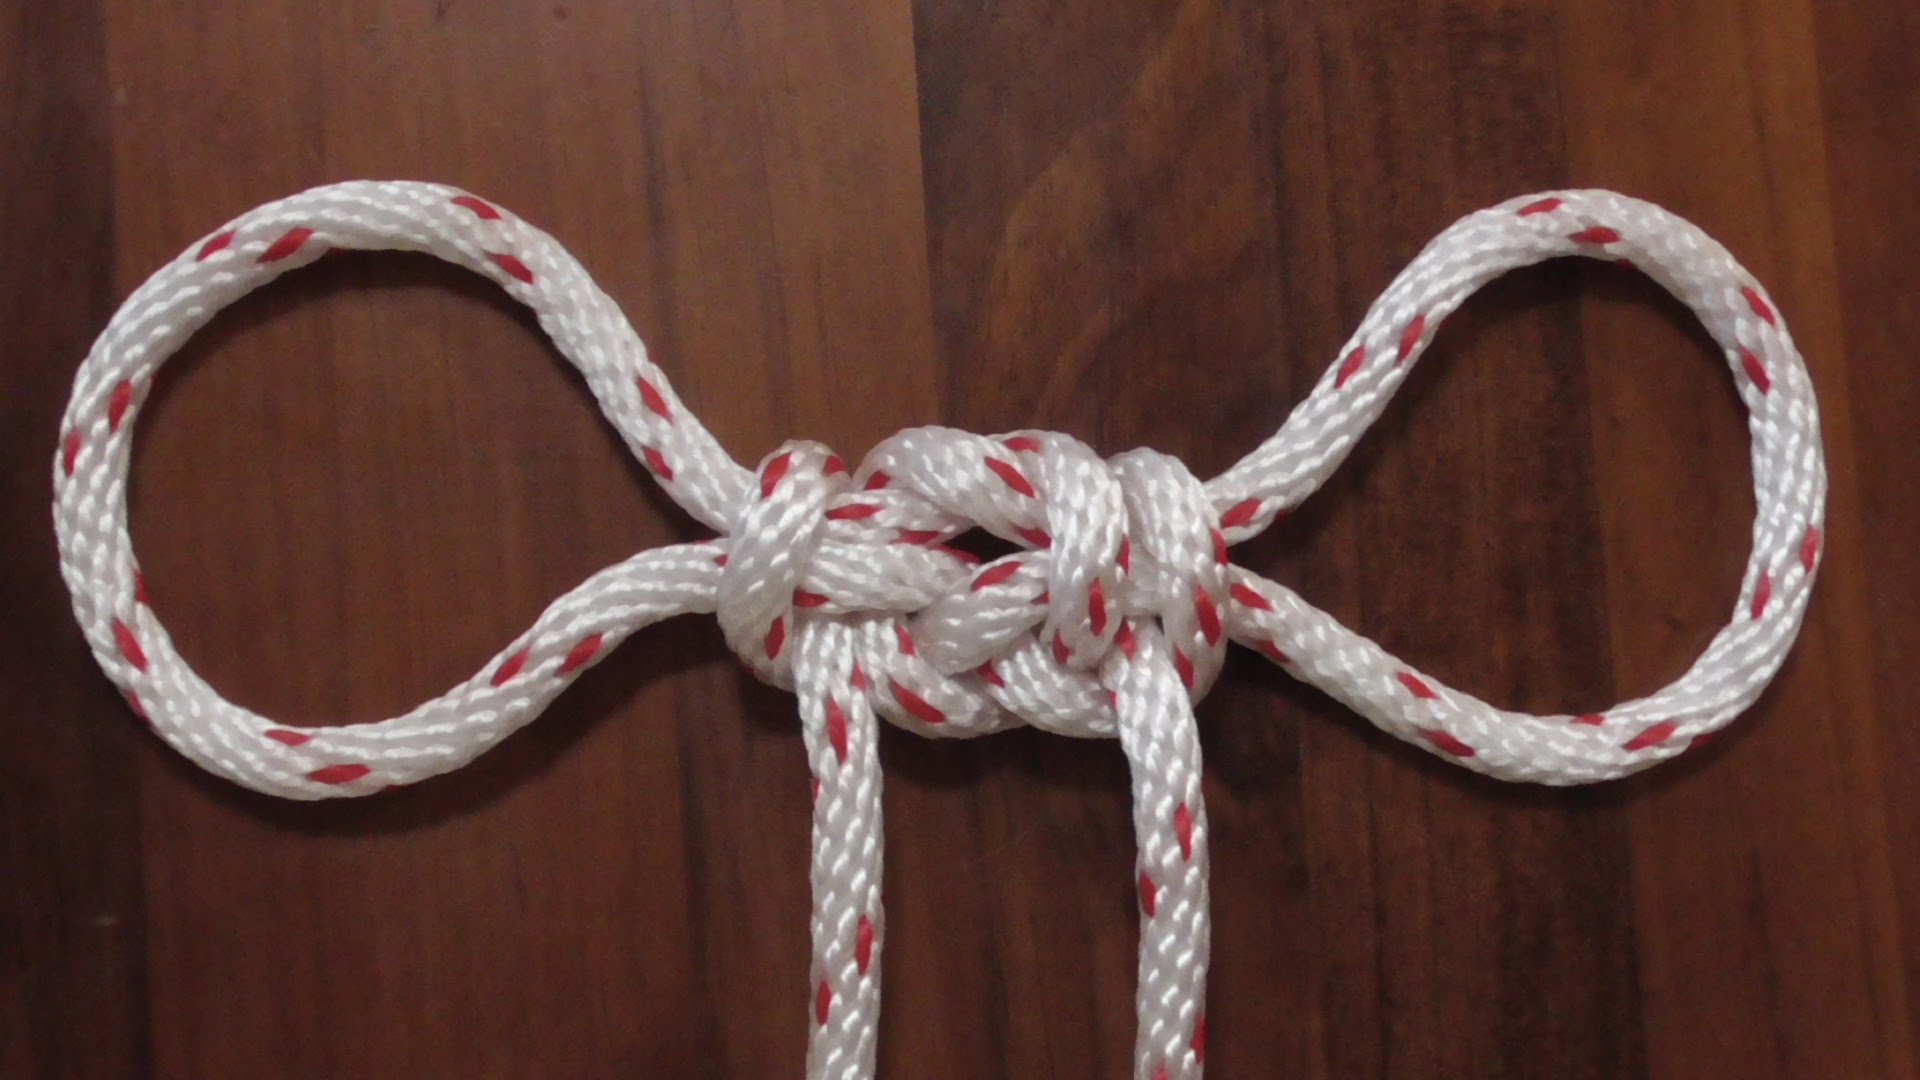 How To Tie A Handcuff Knot. Rope Handcuffs - YouTube